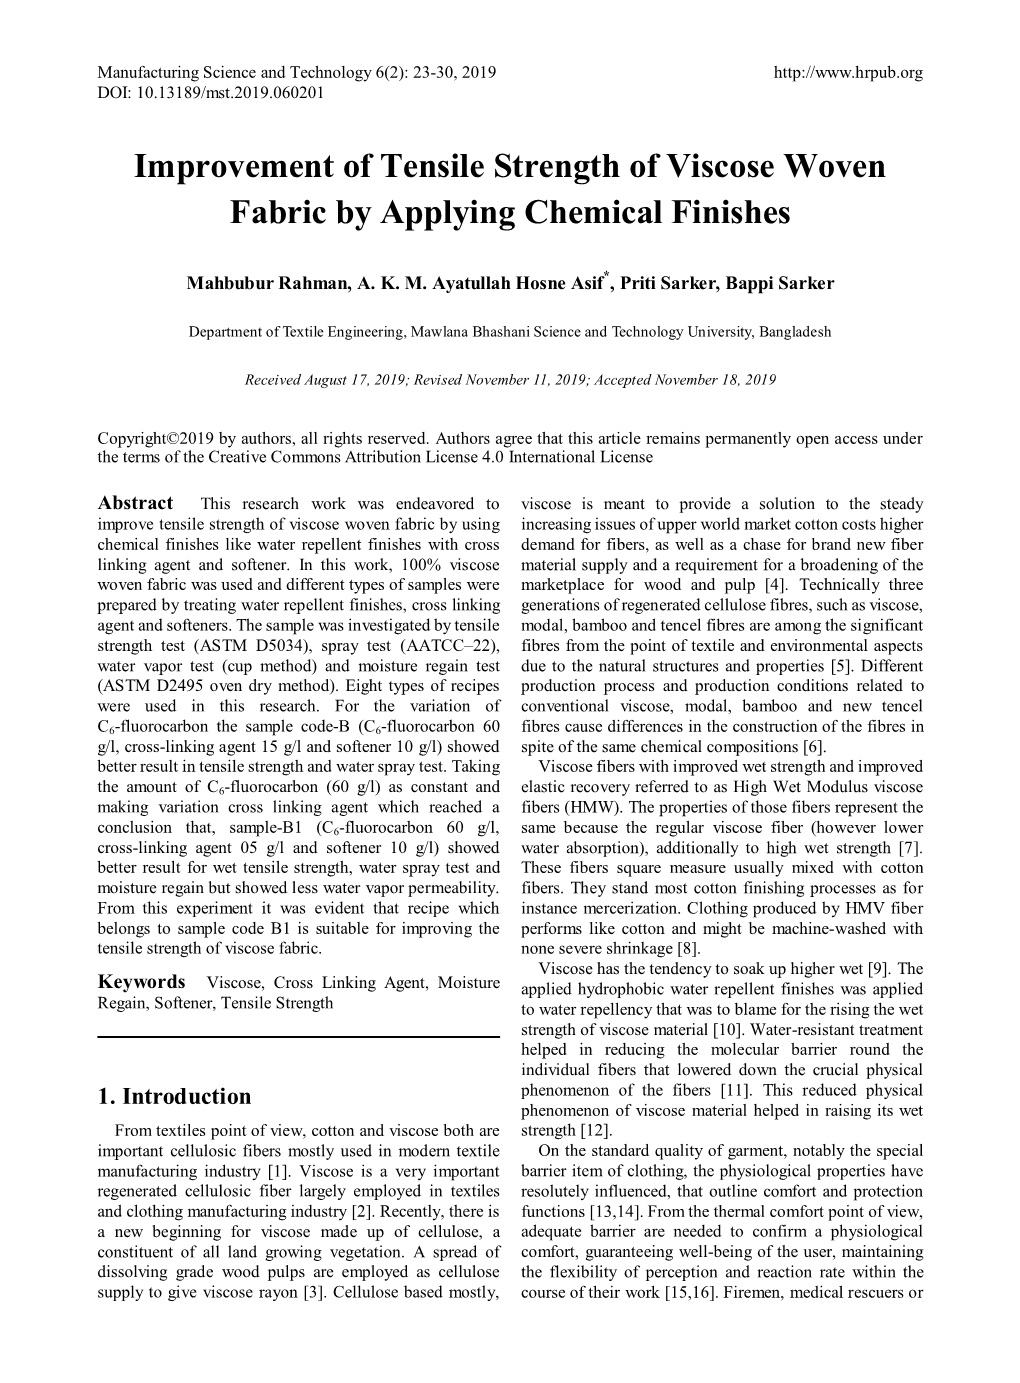 Improvement of Tensile Strength of Viscose Woven Fabric by Applying Chemical Finishes